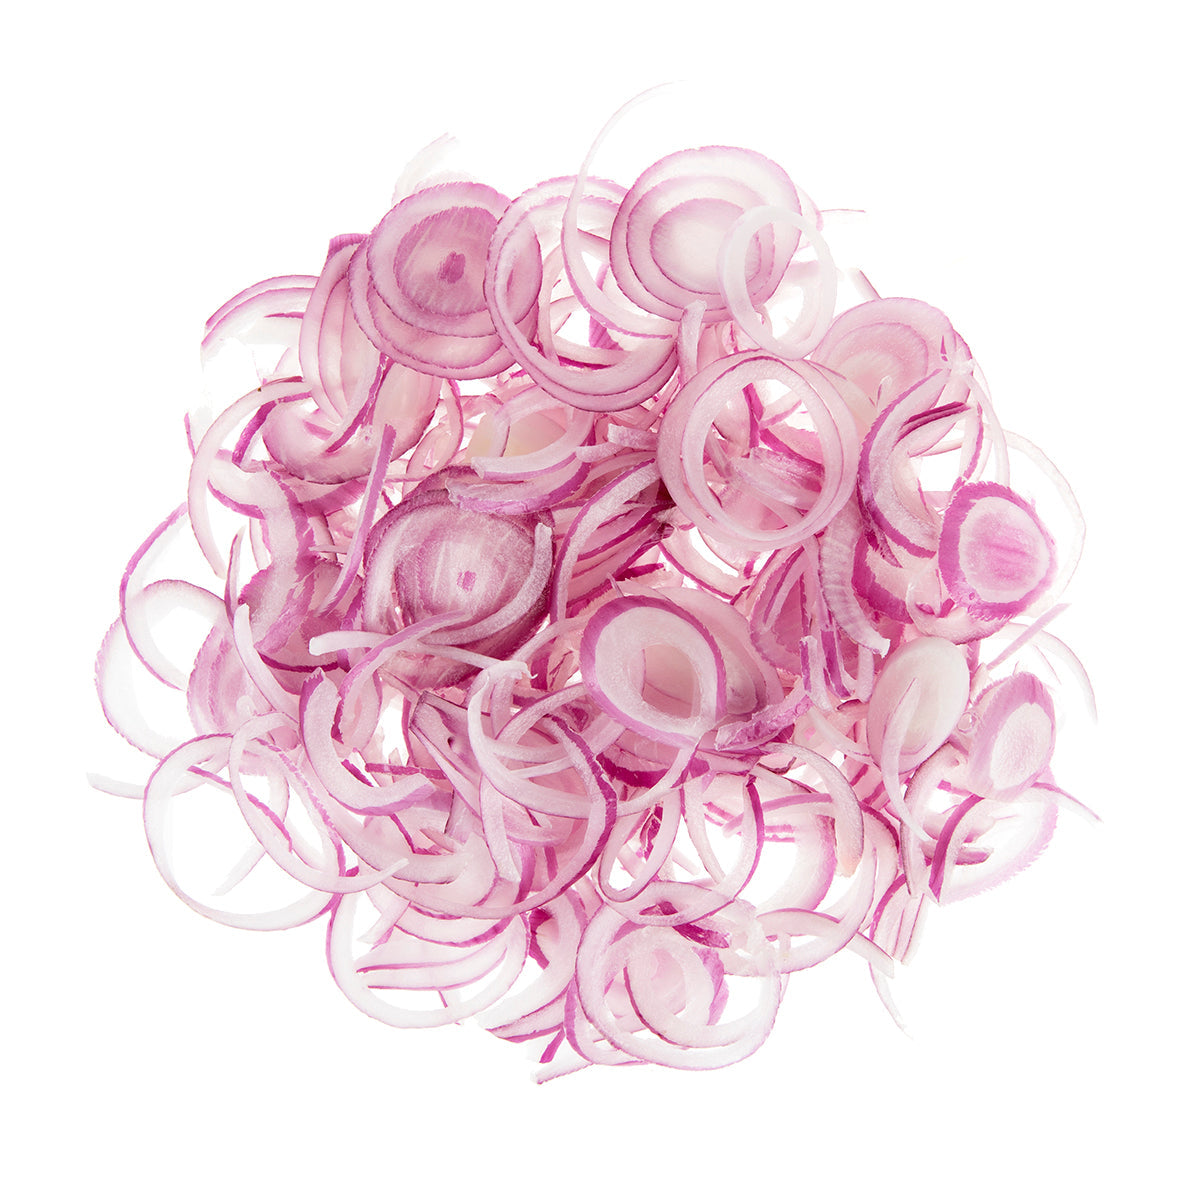 BoxNCase 1/4 Sliced Red Onions 5 LB